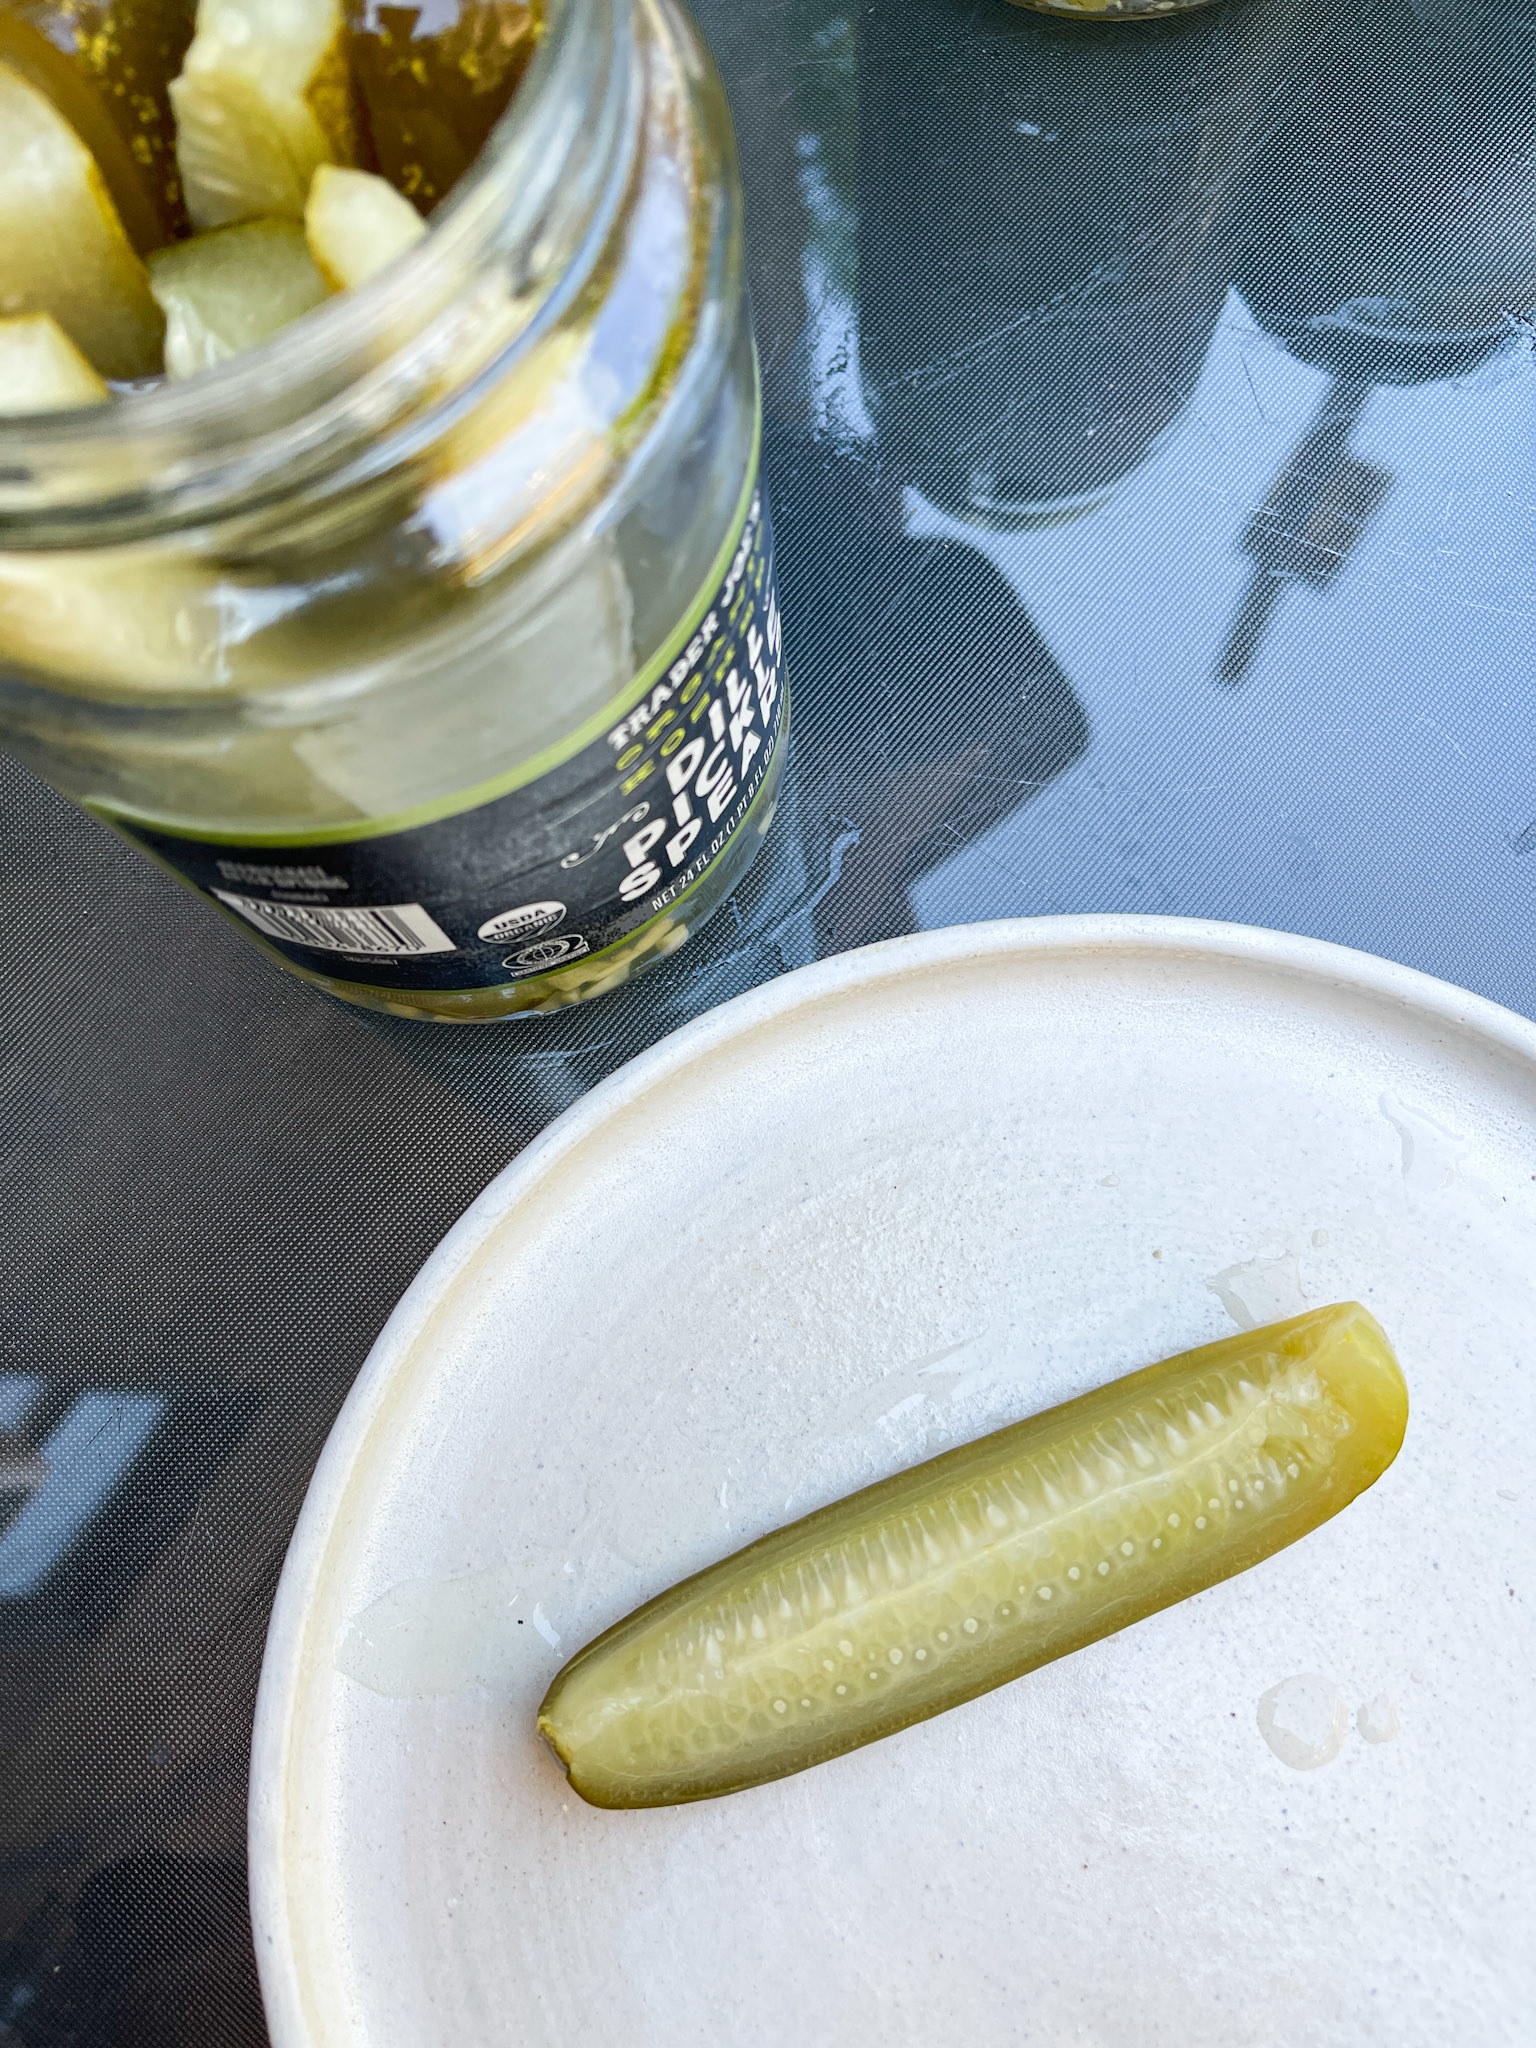 Jar of pickles open with one pickle on a plate, indicating a food topic related to pickles